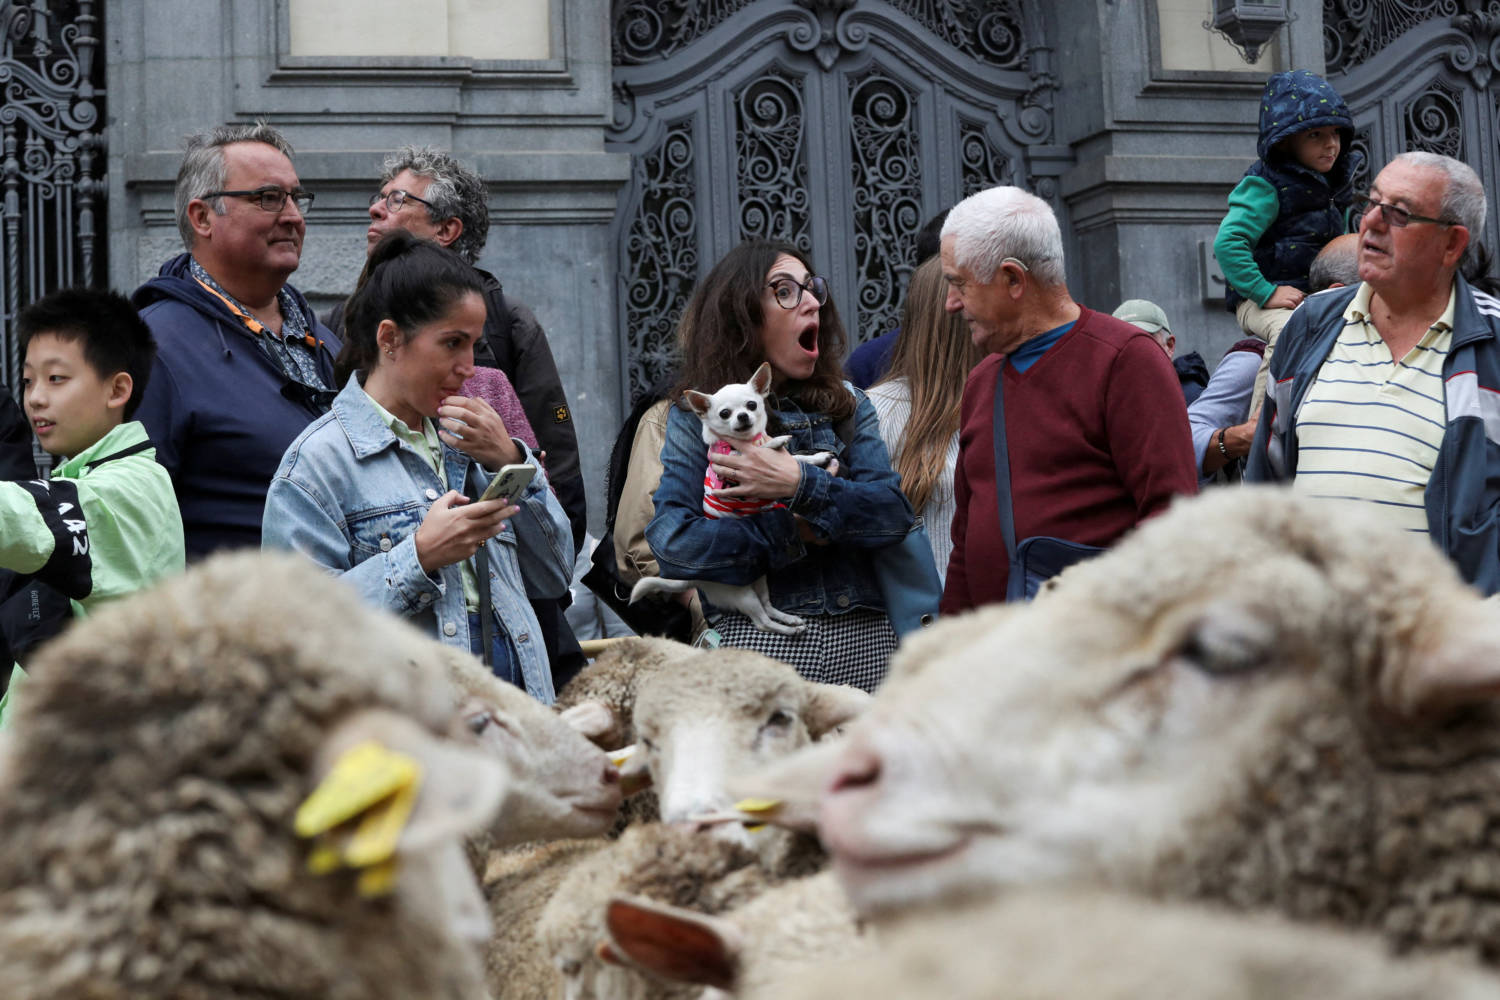 Annual Sheep Parade In Madrid